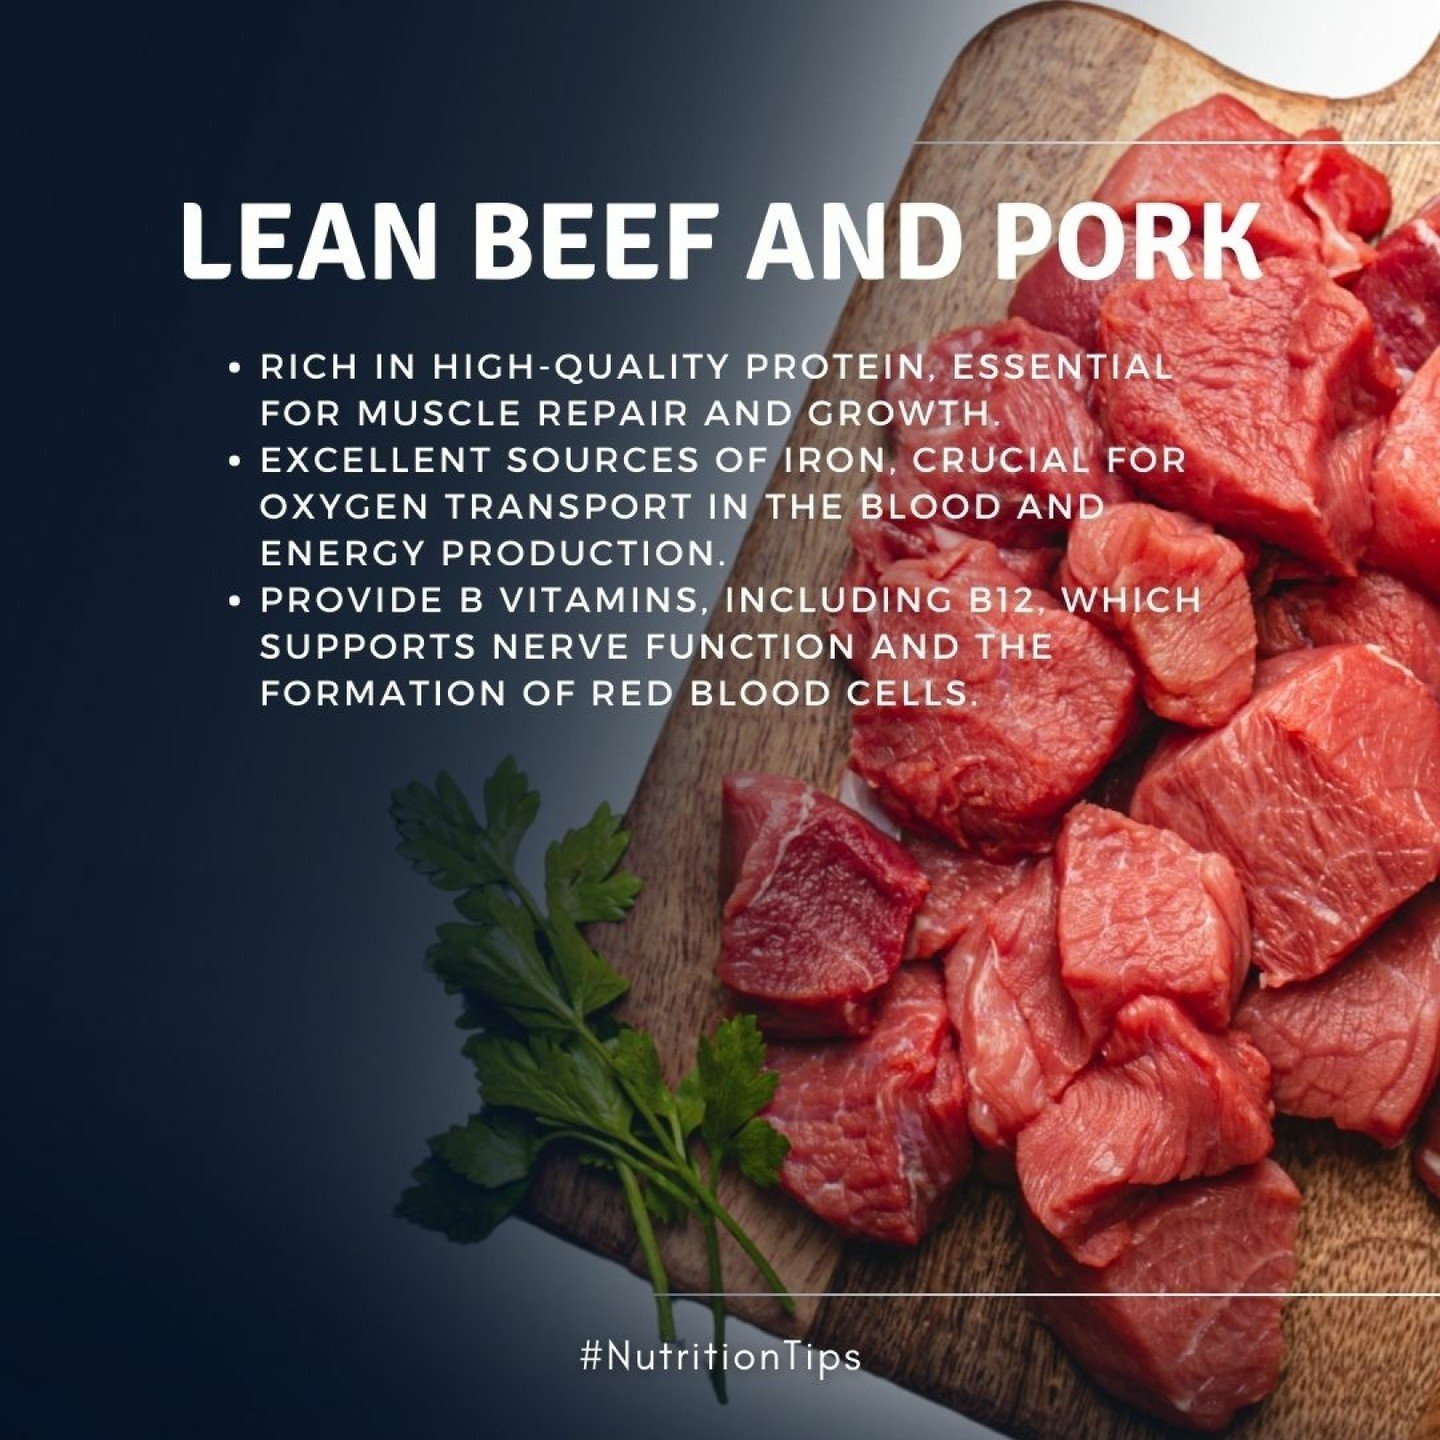 🍖Lean beef and pork are fantastic additions to a balanced diet, providing many nutritional benefits. 

🍖Both meats are rich in high-quality protein, essential for muscle repair and growth. 

🍖Protein also helps keep you full and satisfied, aiding 